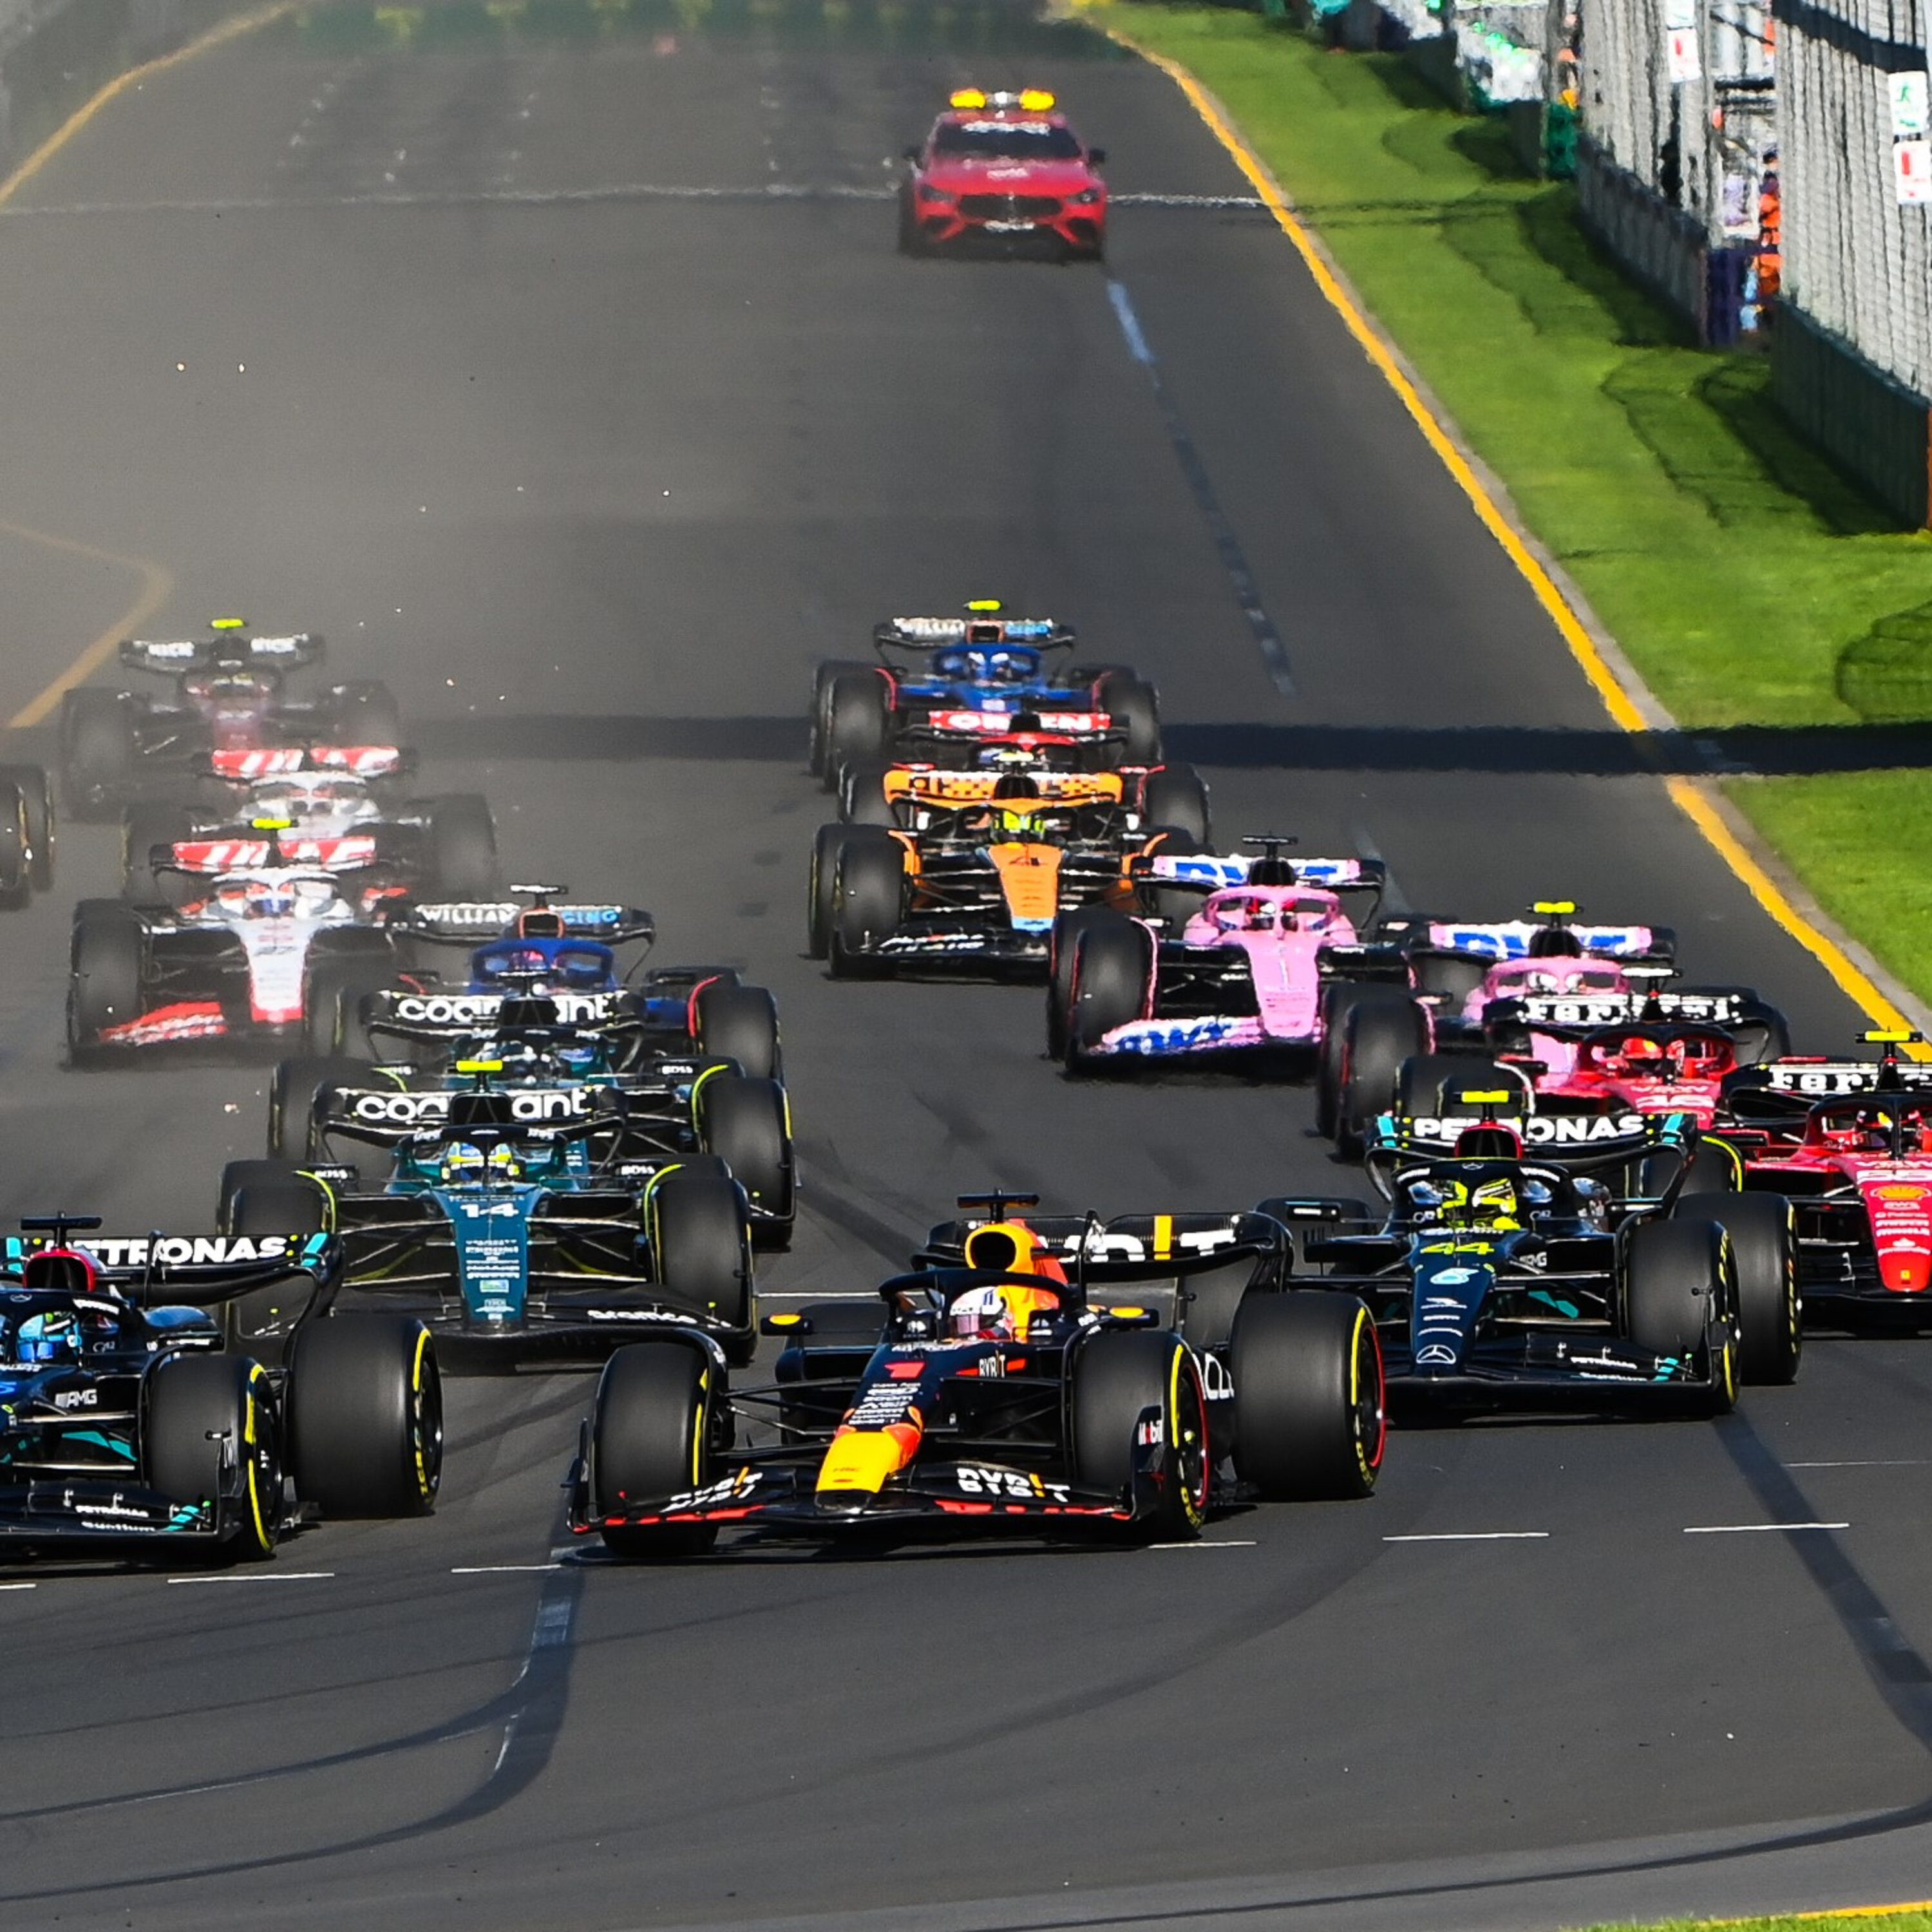 F1 & MotoGP Demo Runs & Other Stories To Watch For - 2024 Australian GP Preview - Inside Line F1 Podcast - Kunal